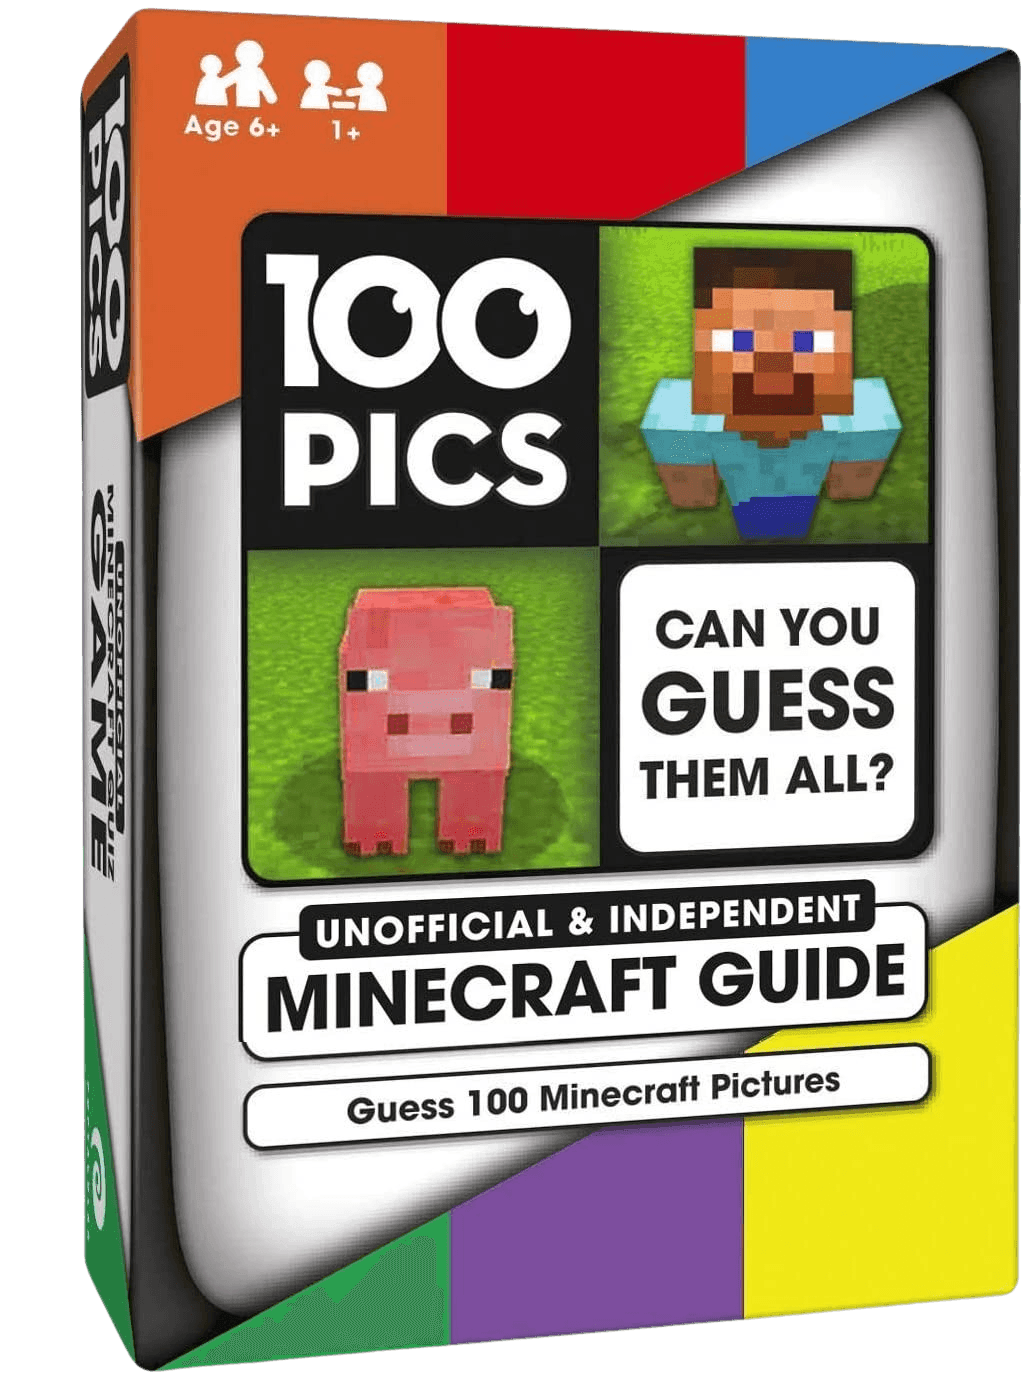 100 PICS - Unofficial Minecraft - The Card Vault